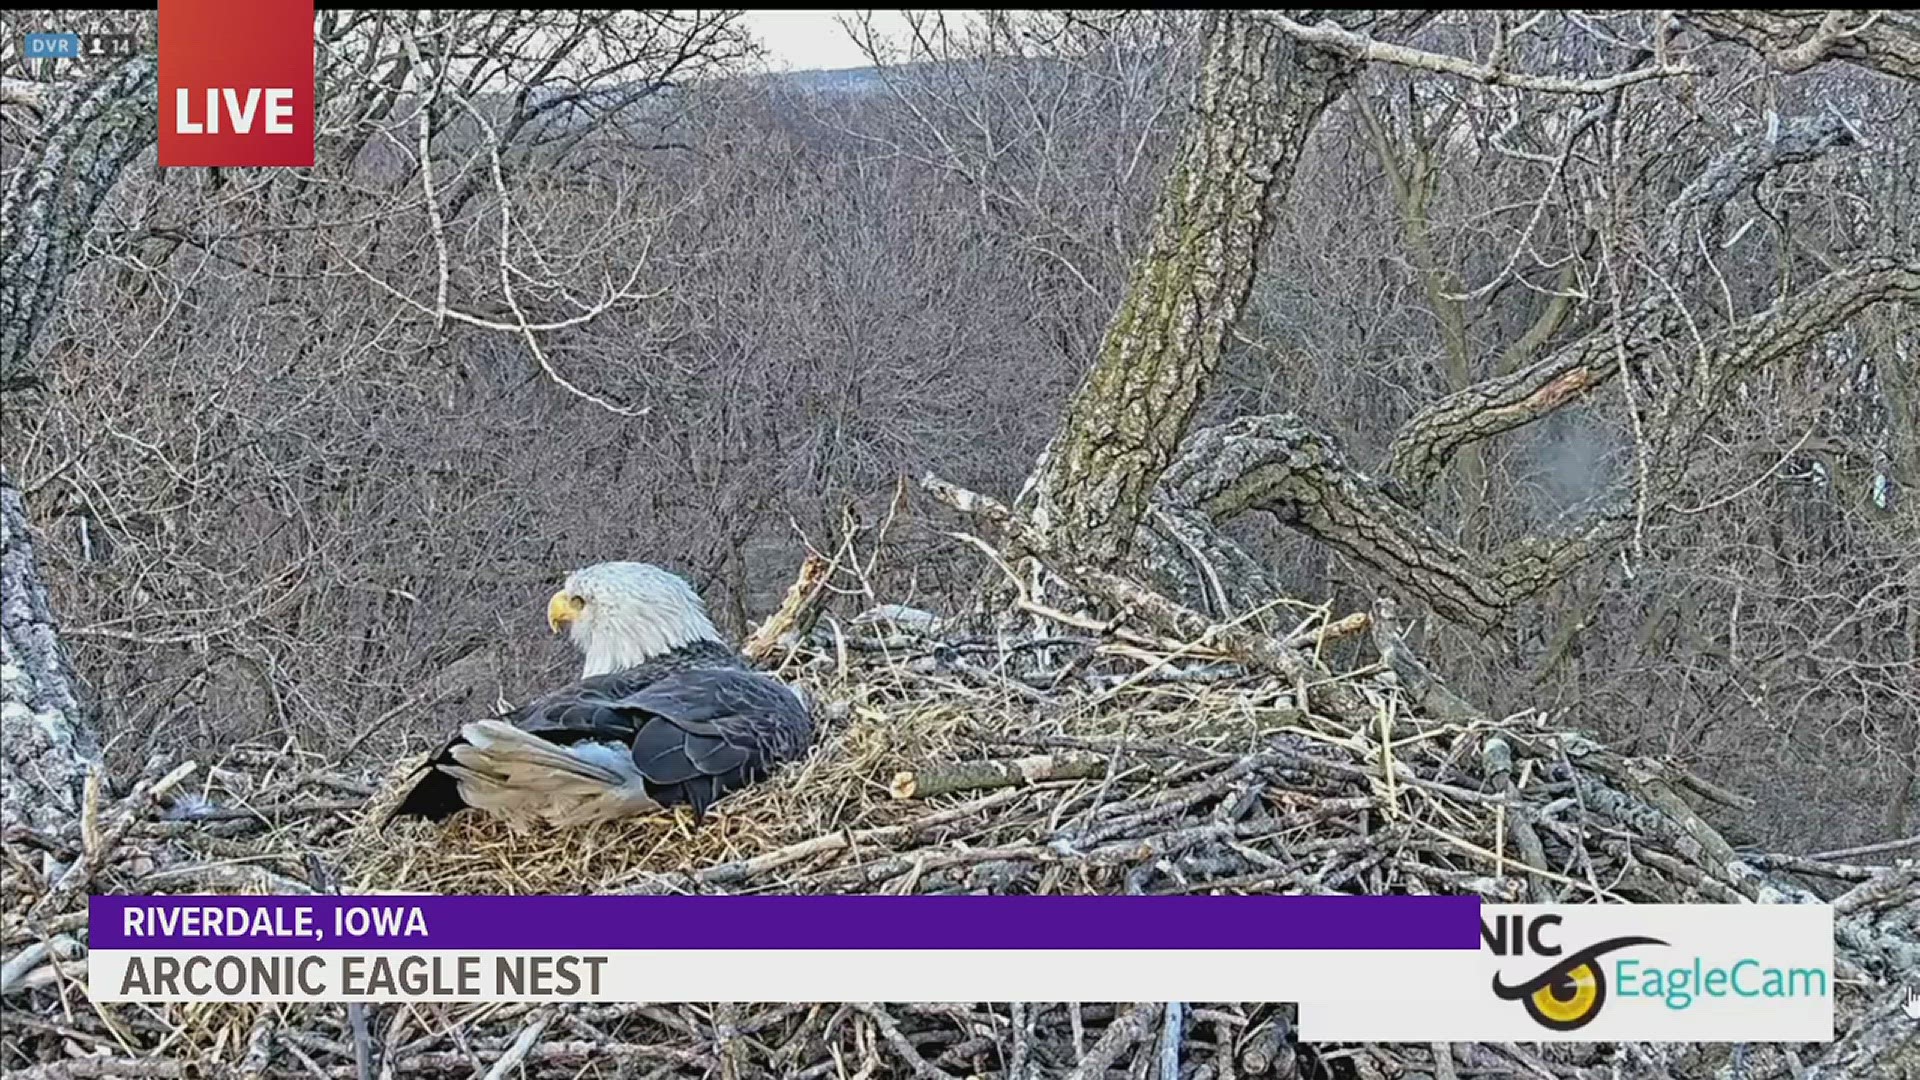 According to Arconic, there are two eggs in the eagles' nest, with an expected hatching date of around April 9.